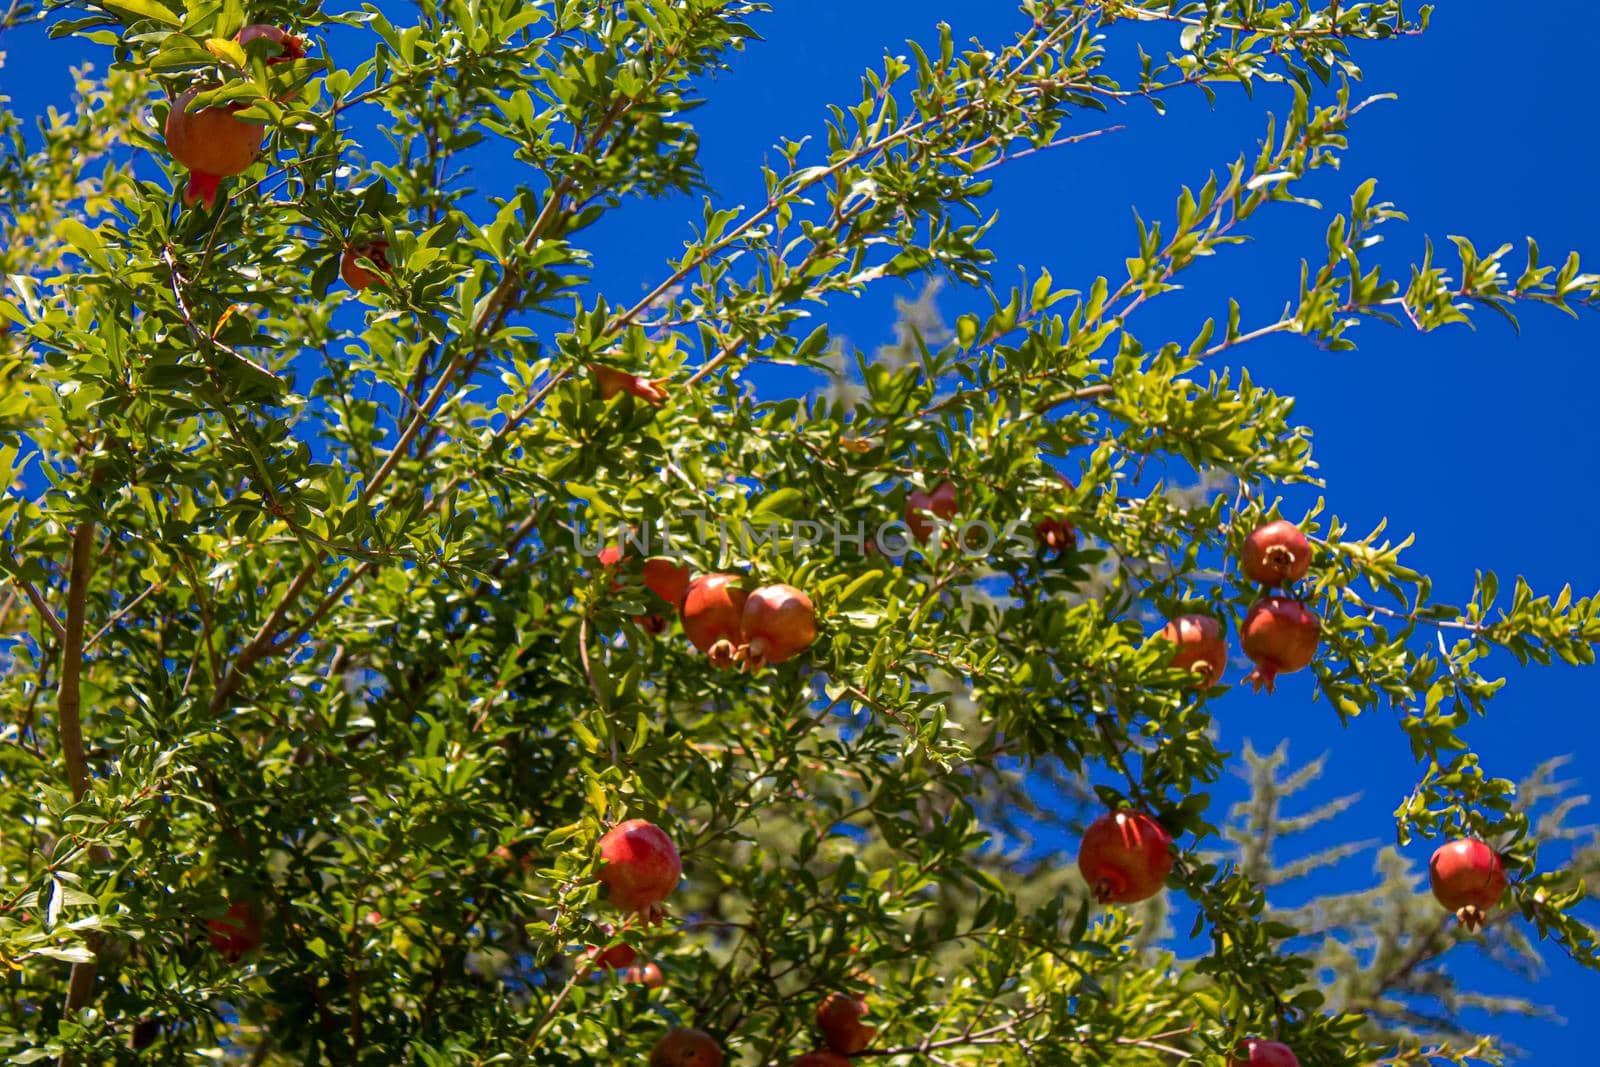 pomegranate on tree in a farm garden.selectiv focus by mila1784